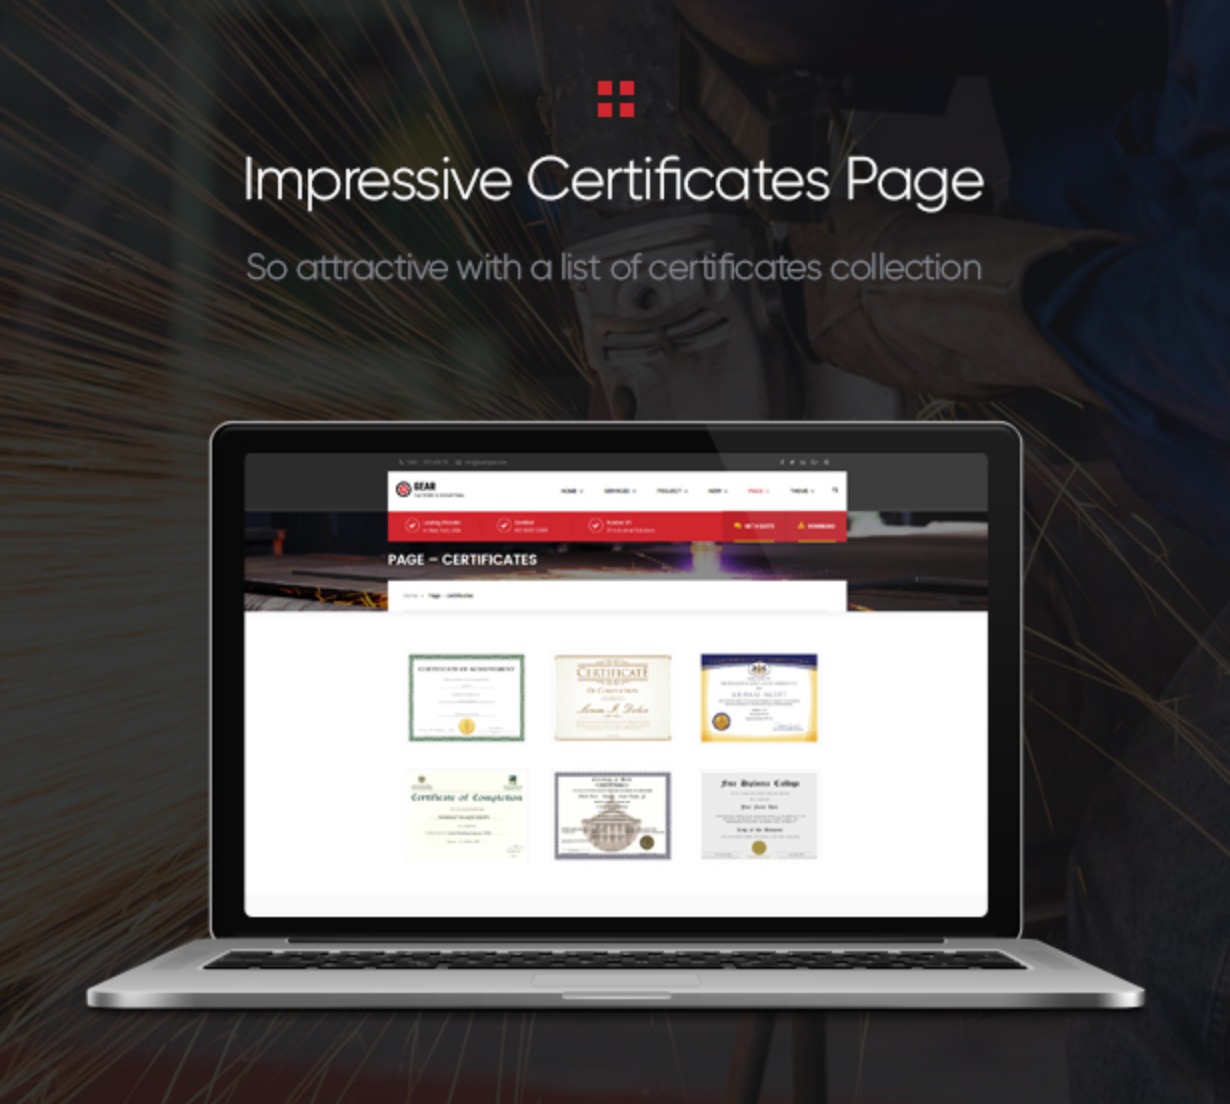 Gear - Factory and Industry Business WordPress Theme impressive certificate page